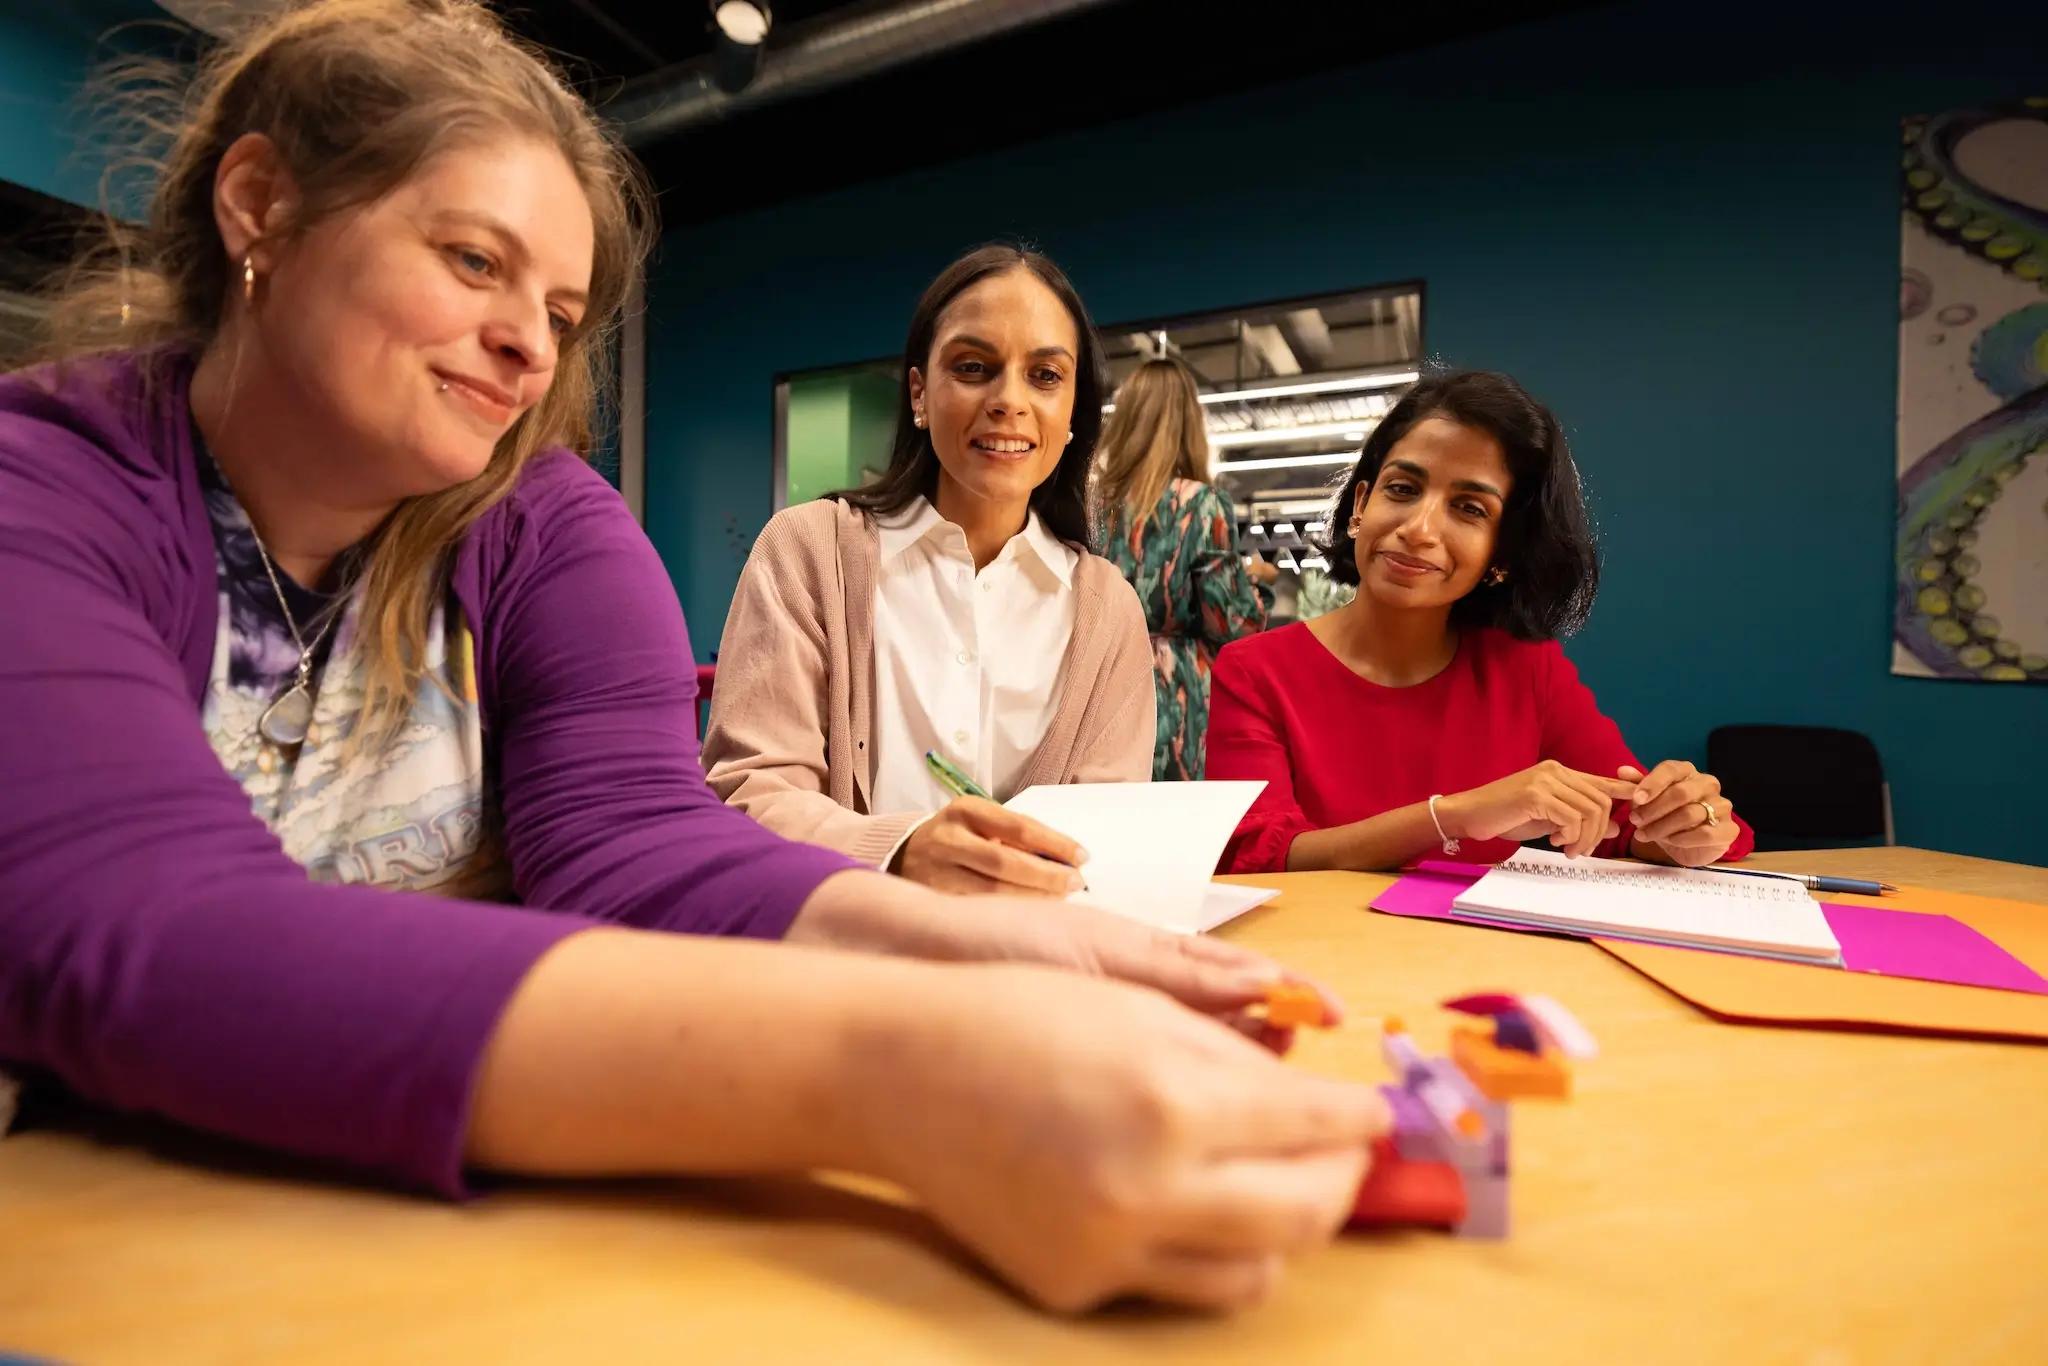 Three women collaborating at a colorful workshop table, with one assembling puzzle pieces.